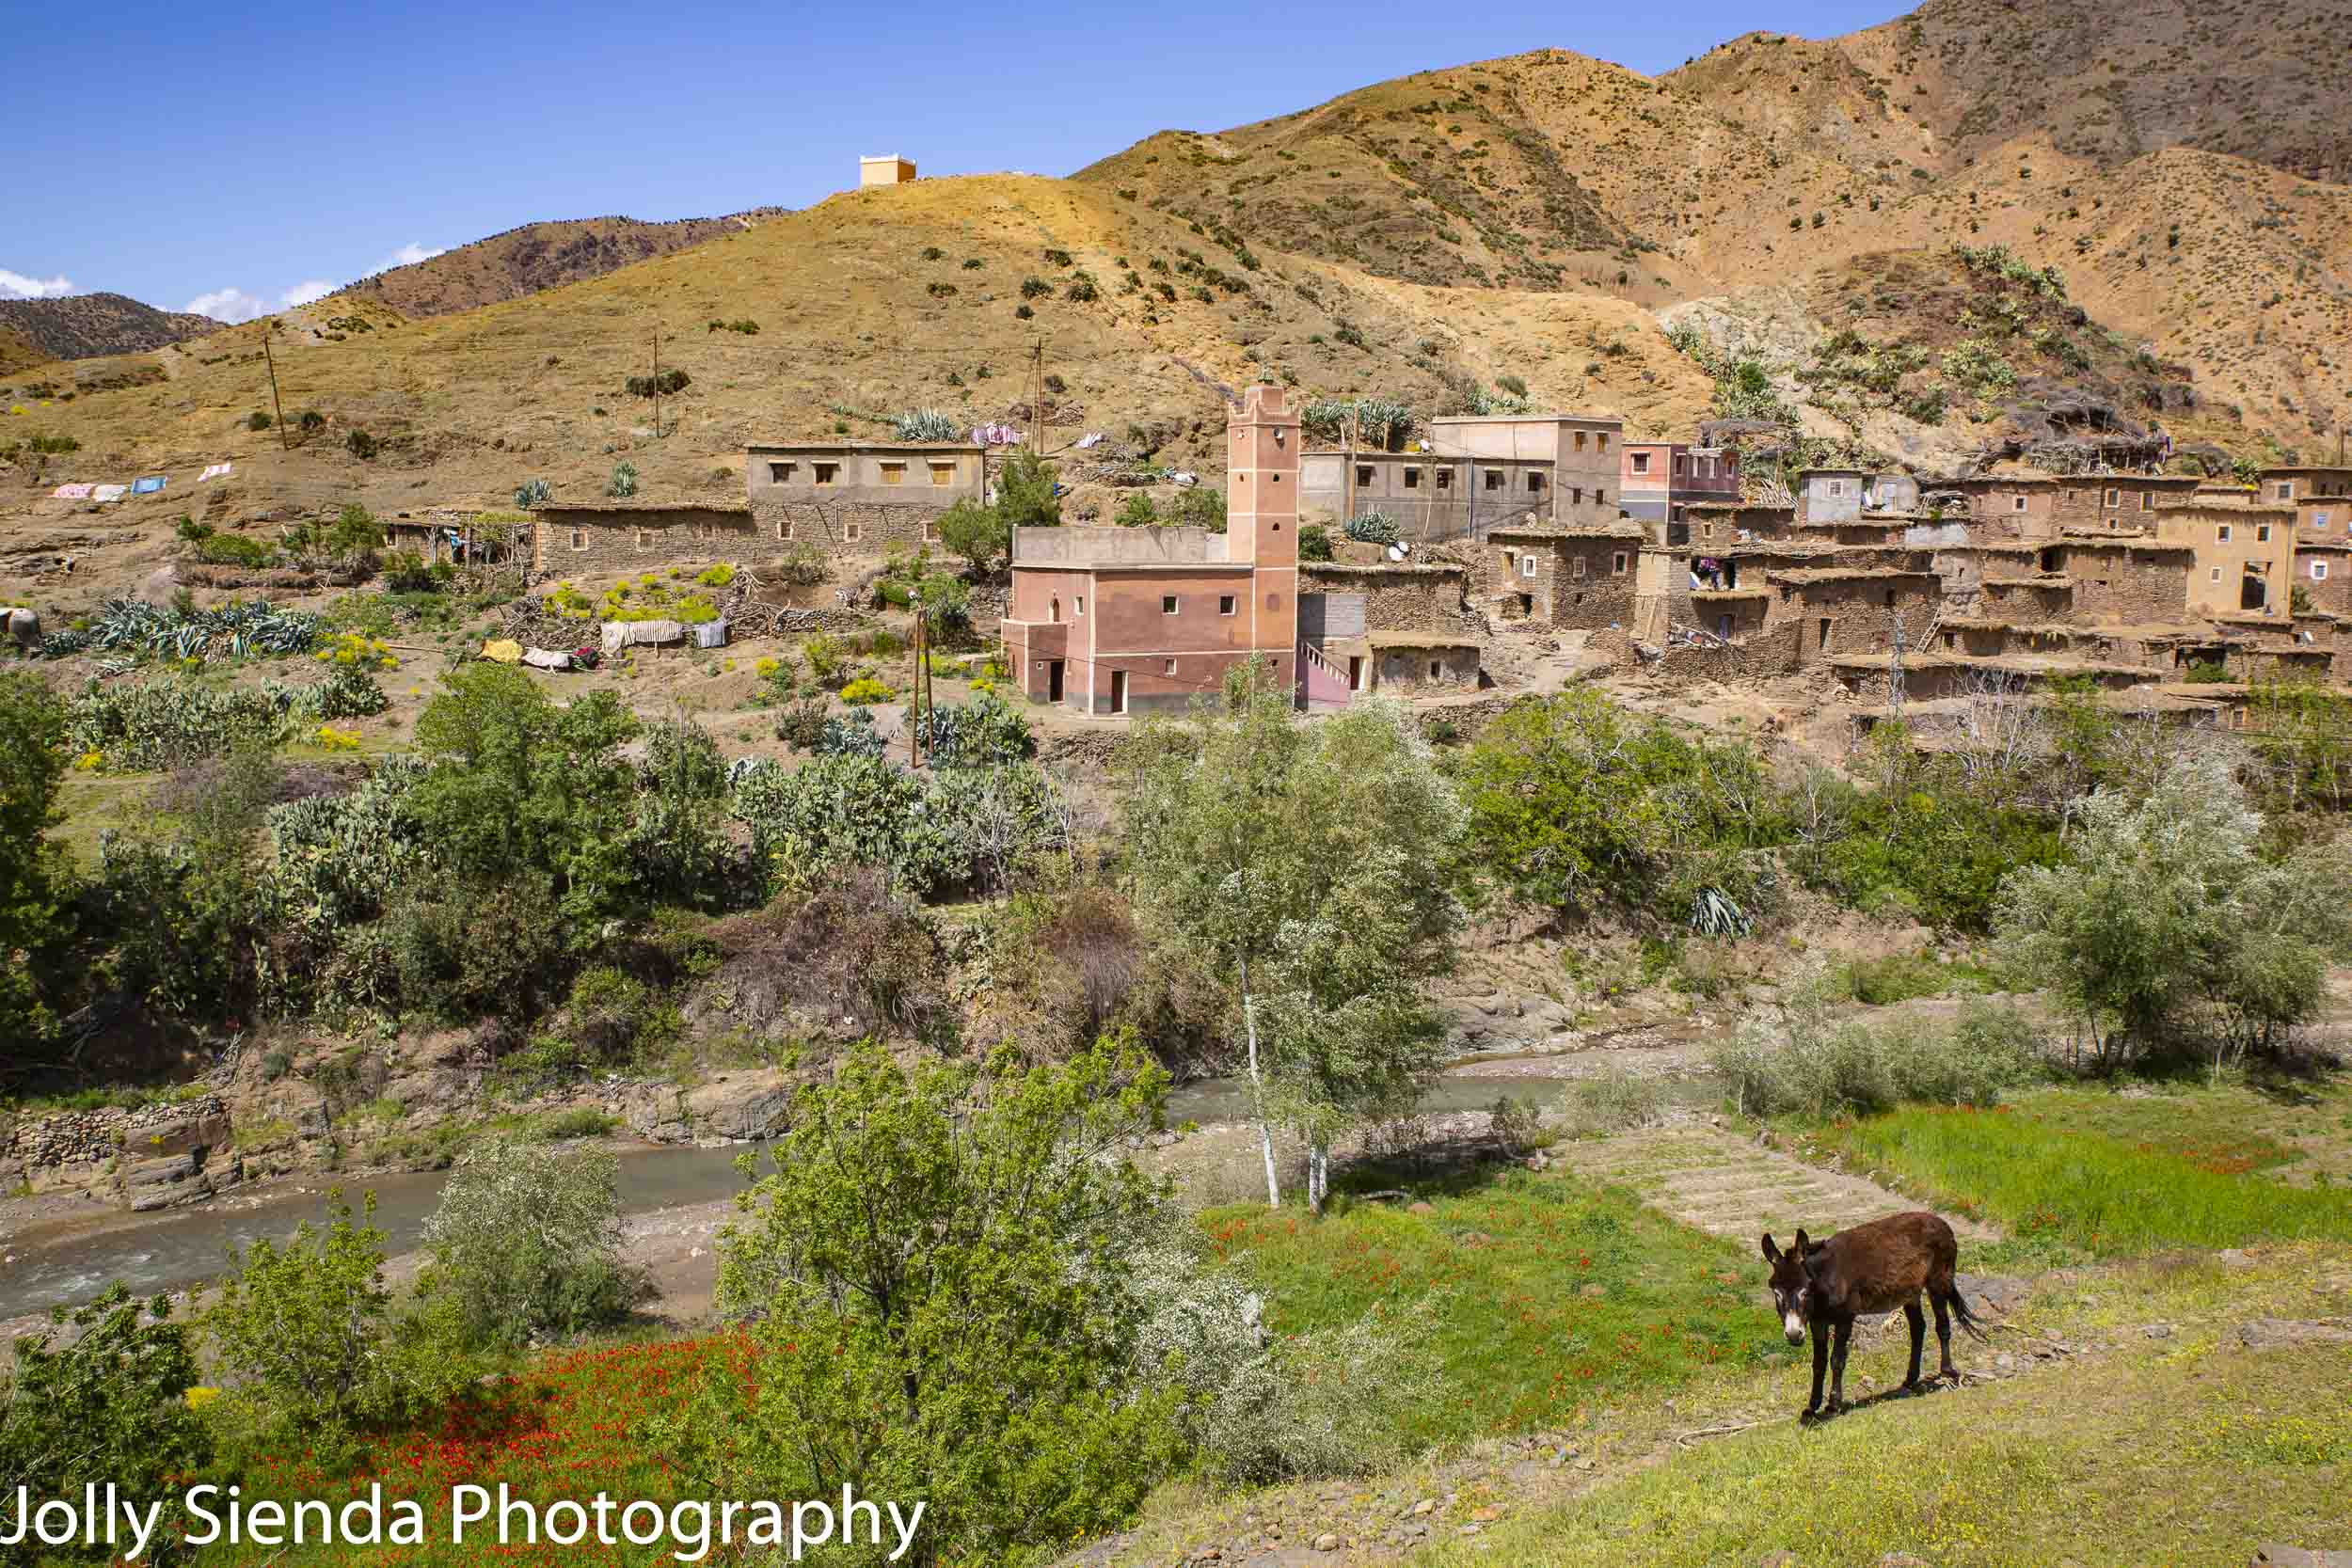 High Atlas Mountain village and a donkey